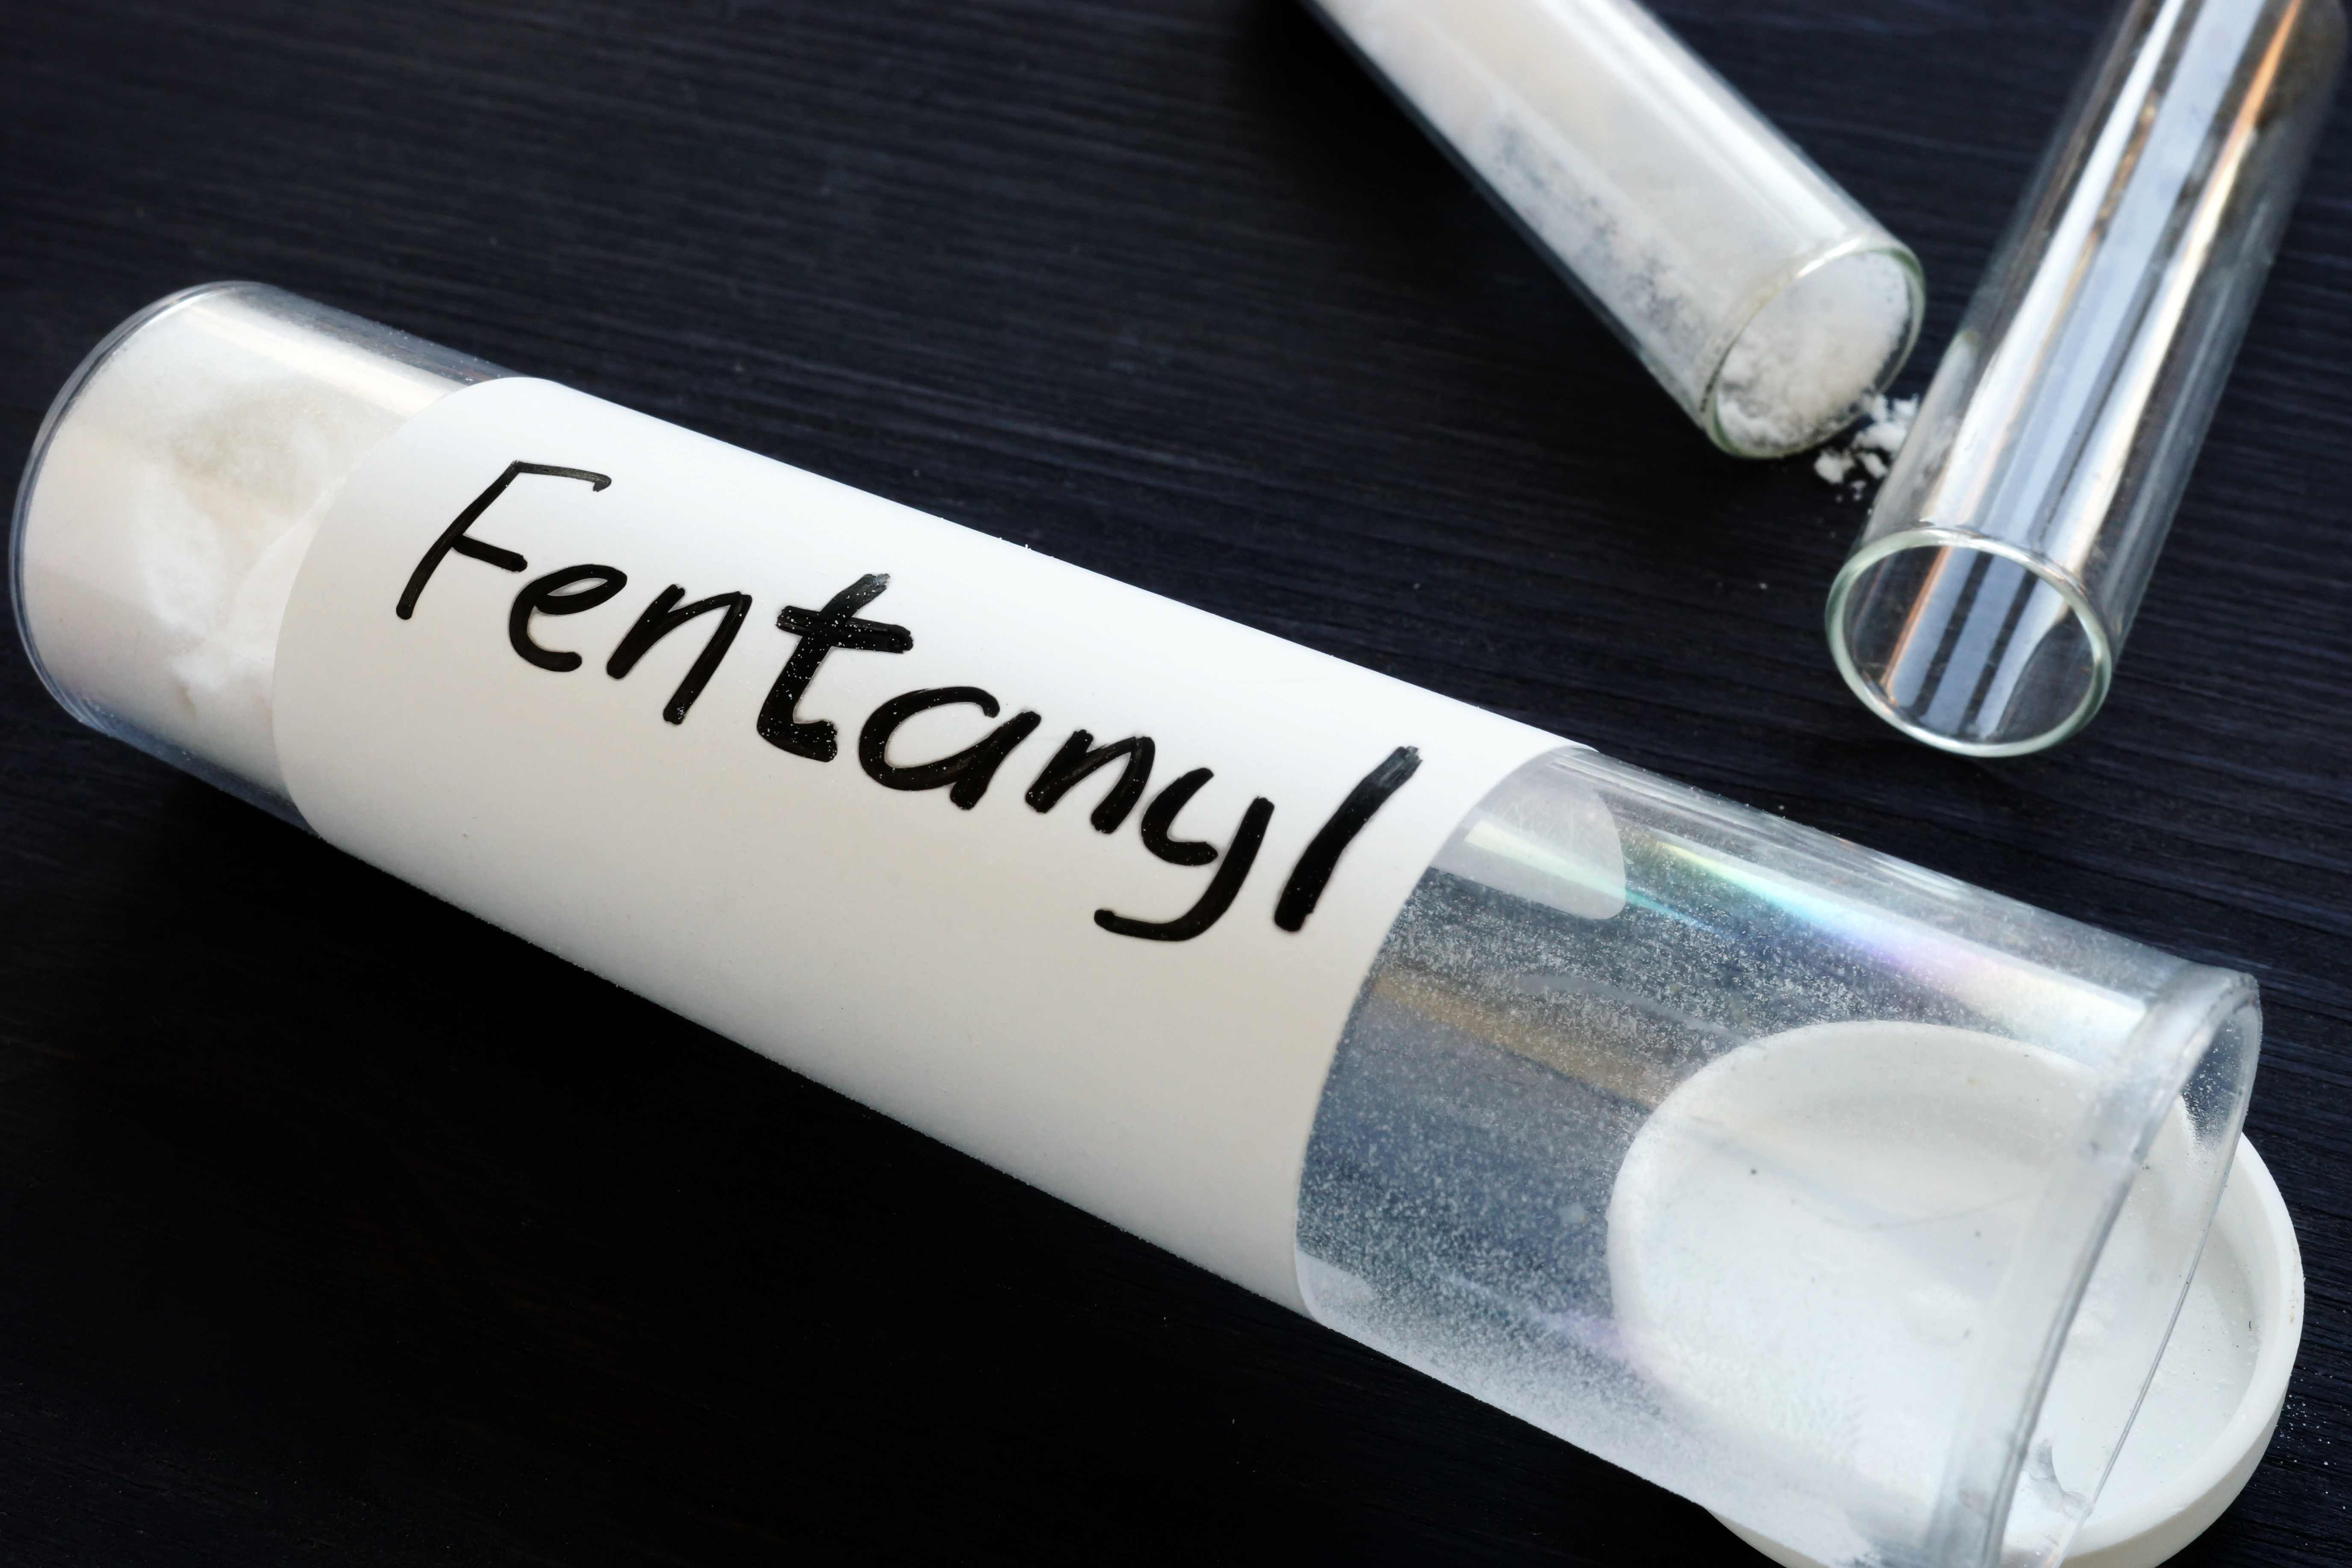 Workplace drug testing for fentanyl now a growing concern